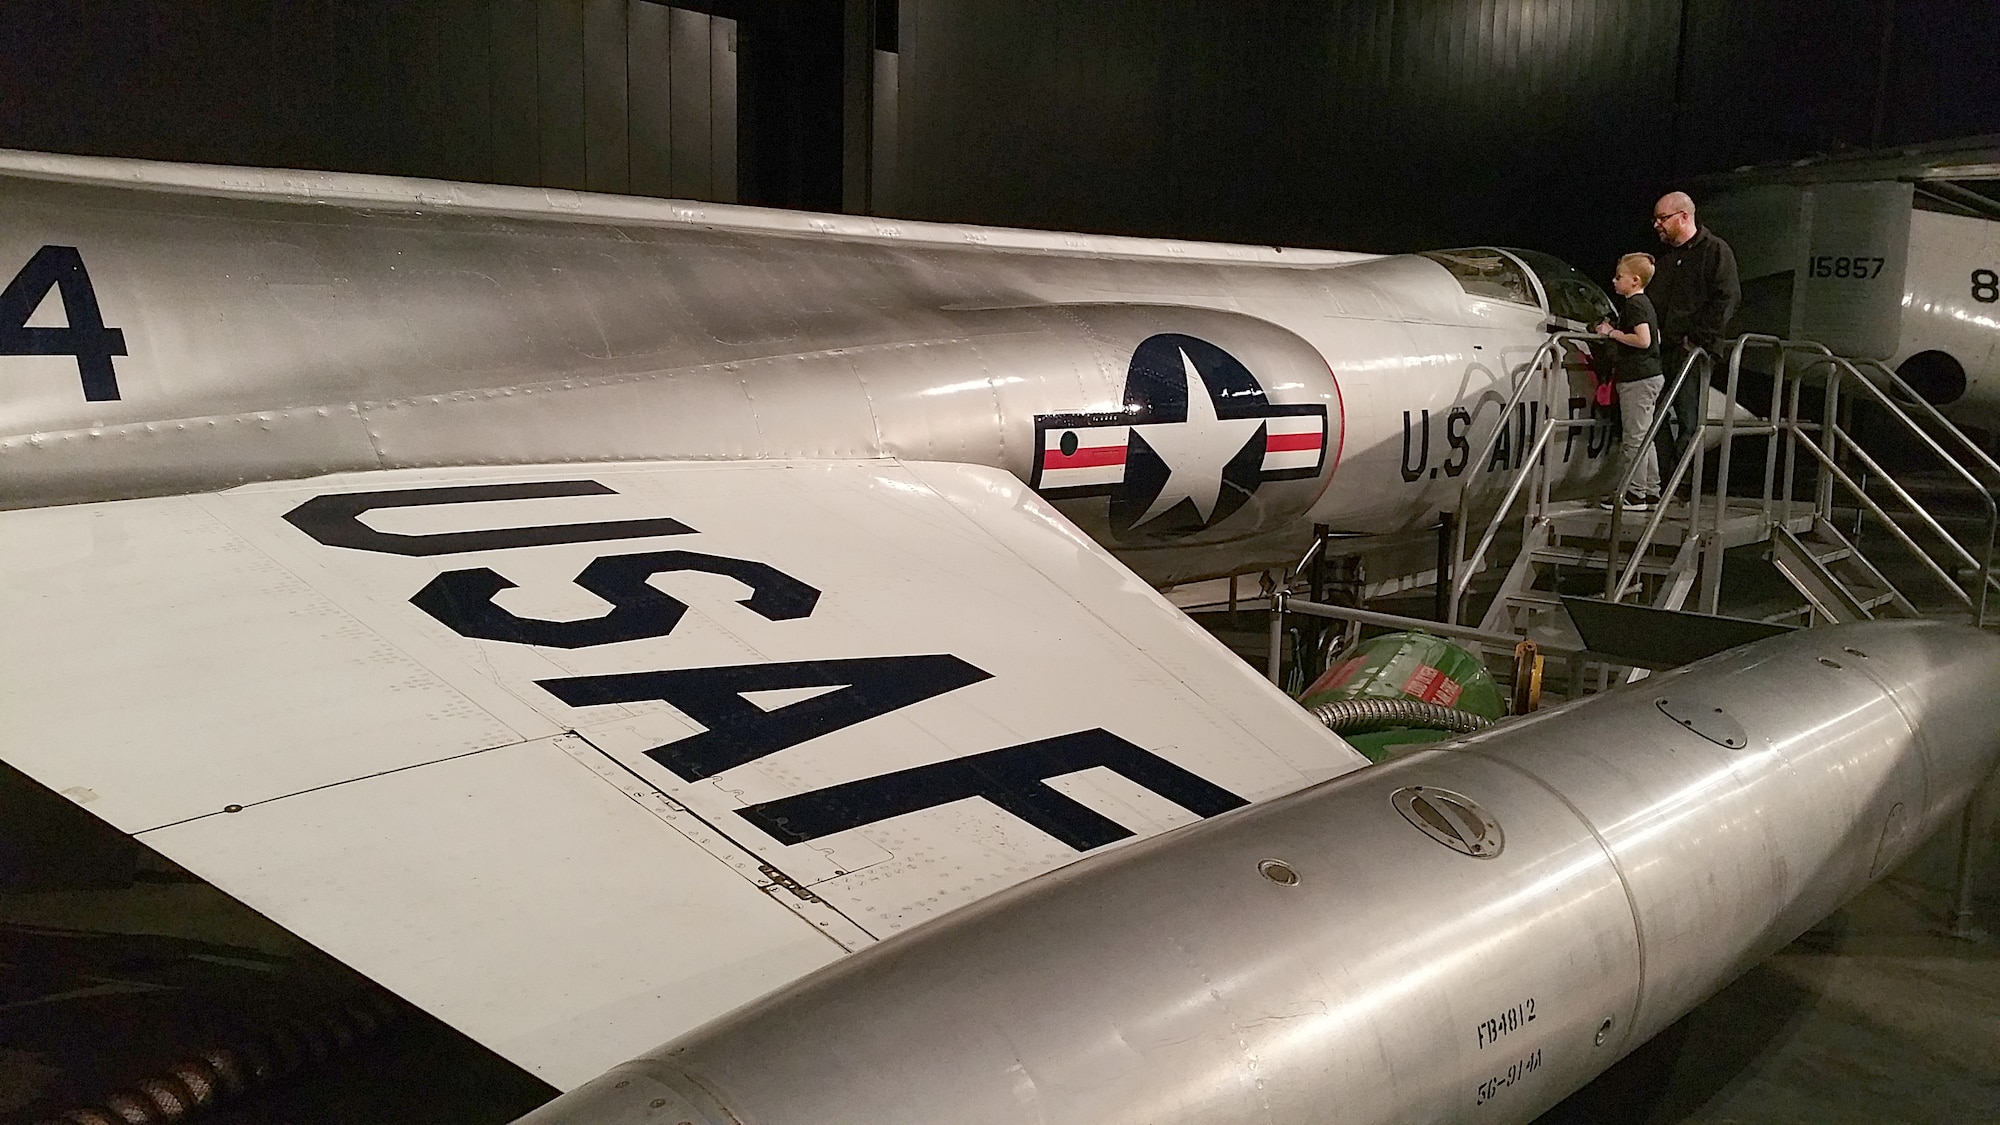 DAYTON, Ohio -- Lockheed F-104C Starfighter on display in the Cold War Gallery at the National Museum of the United States Air Force. (U.S. Air Force photo)